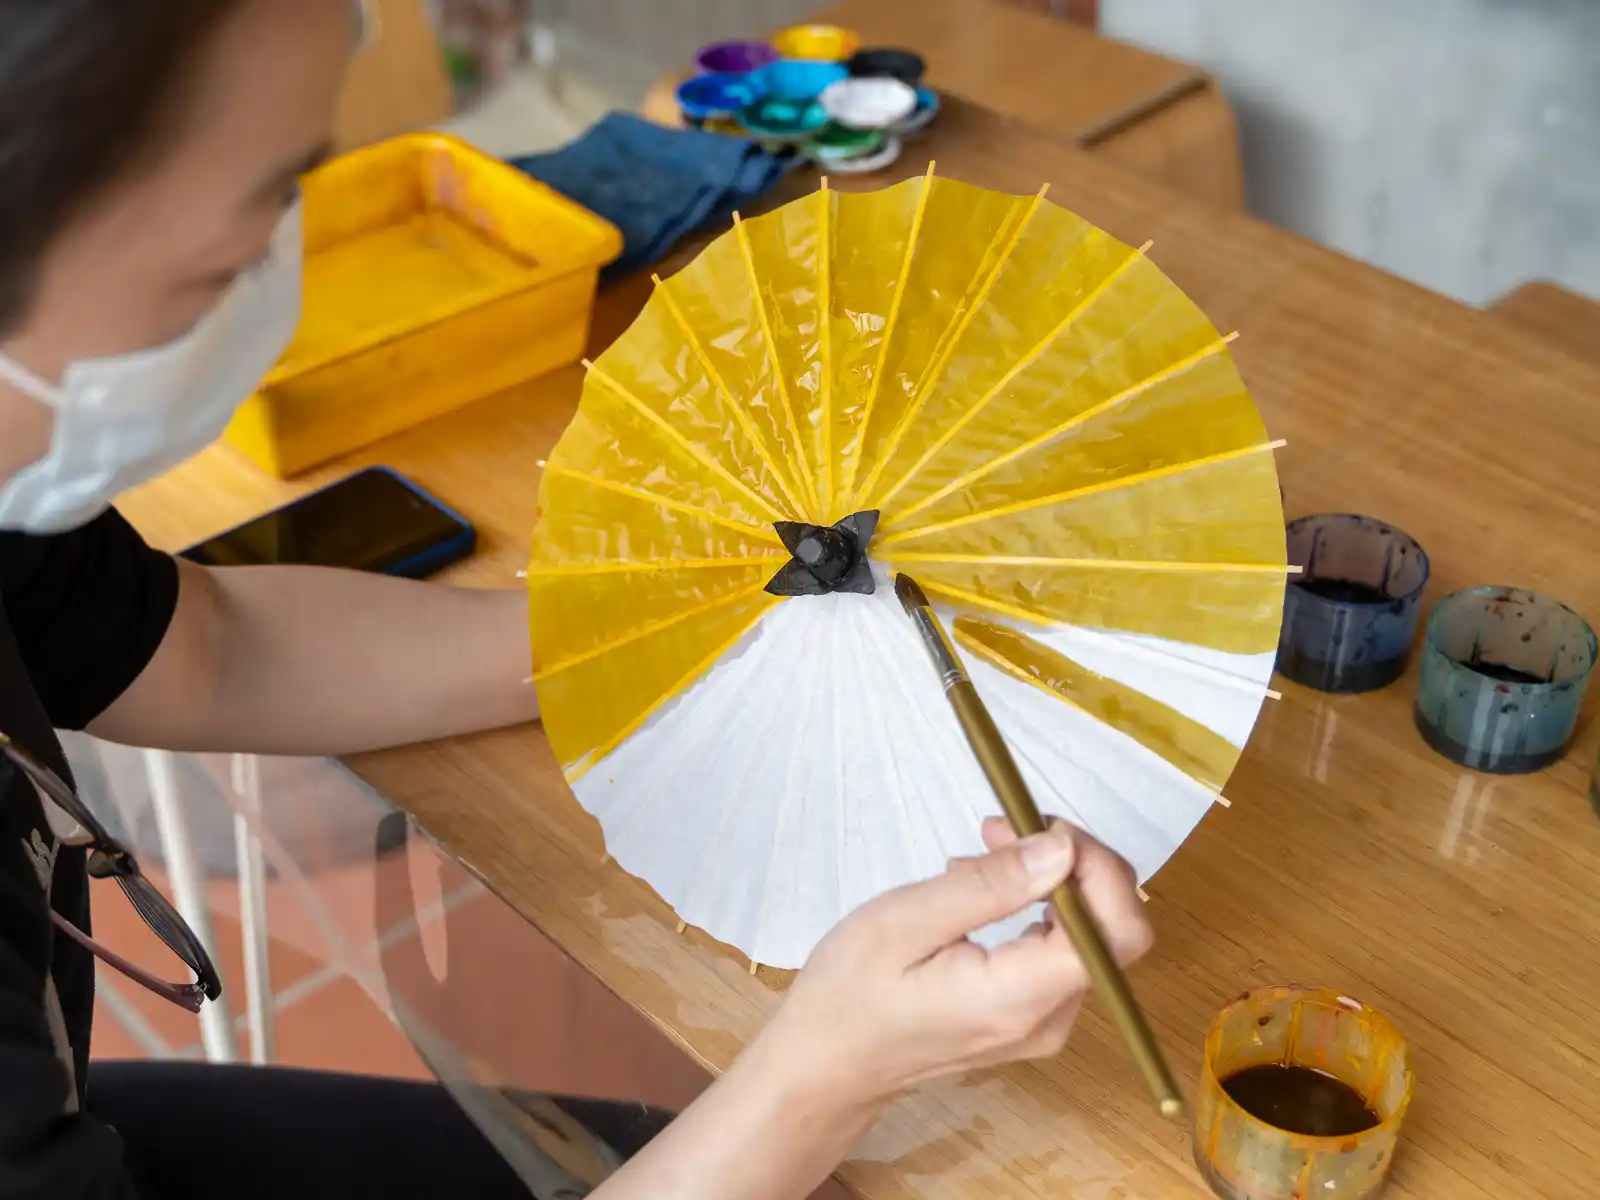 A tourist carefully hand paints her own custom oil-paper umbrella.